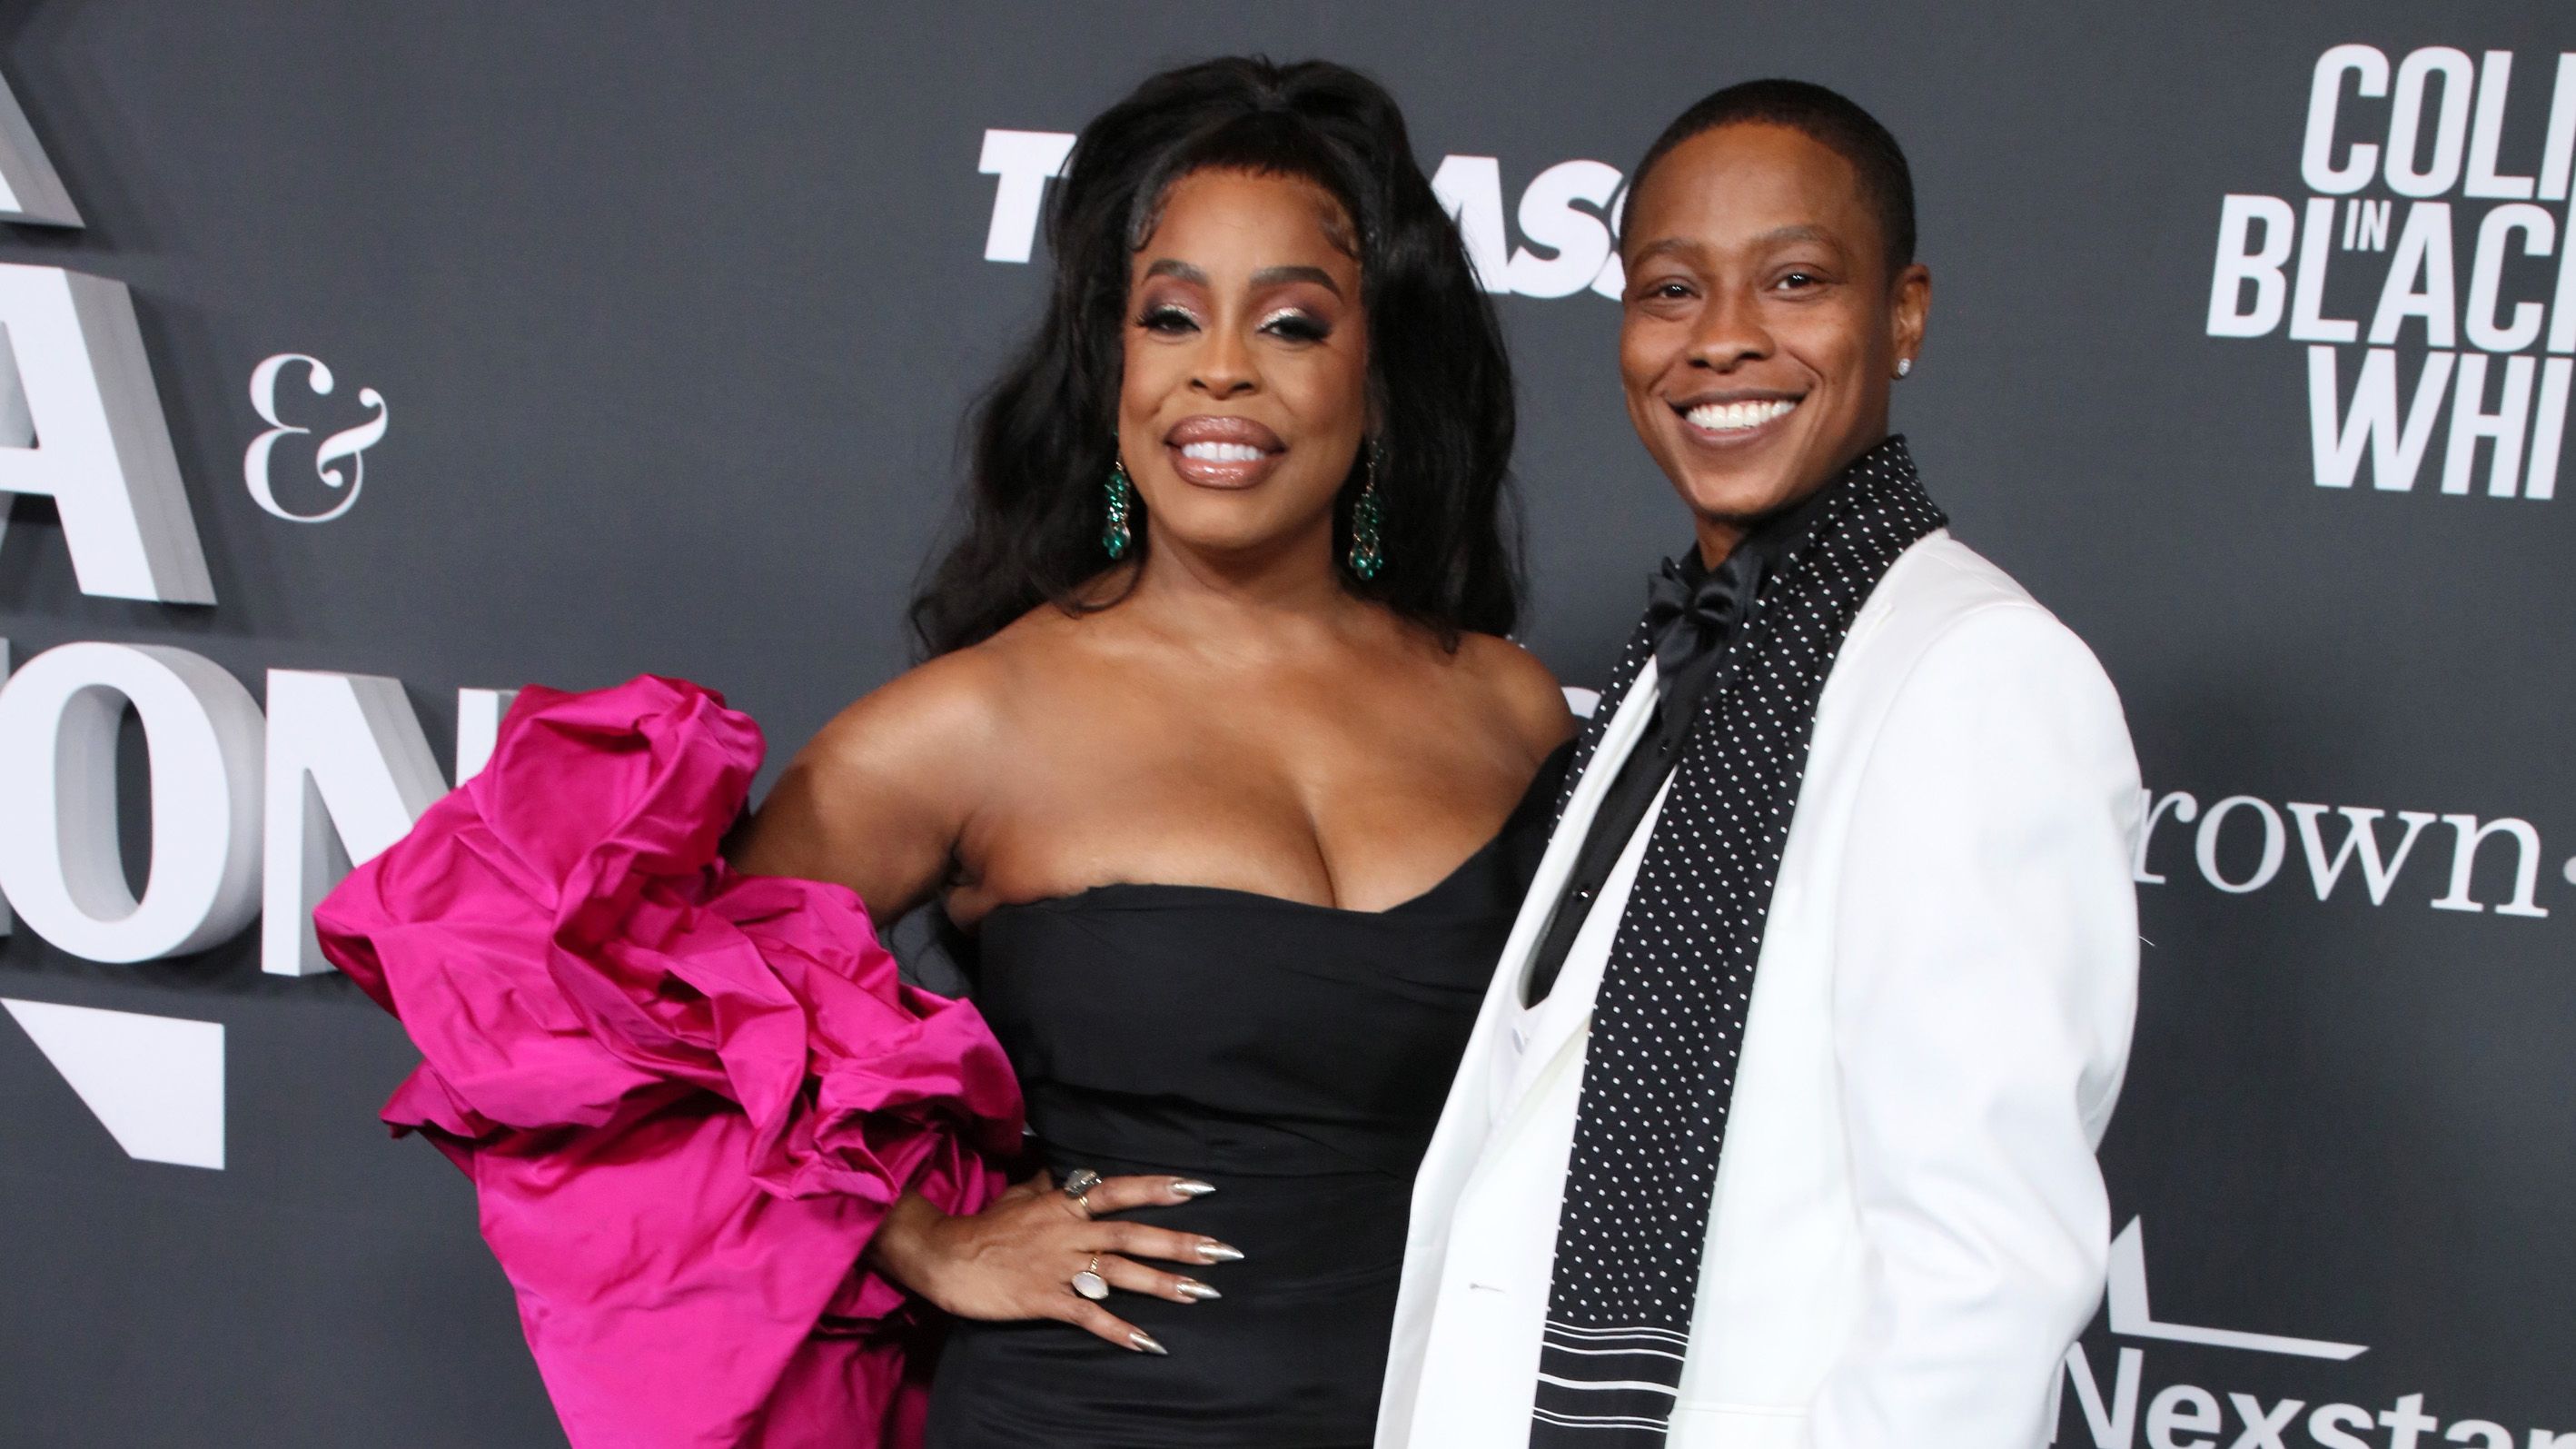 Niecy Nash And Jessica Betts Make History As First Same-Sex Couple To Cover ESSENCE News